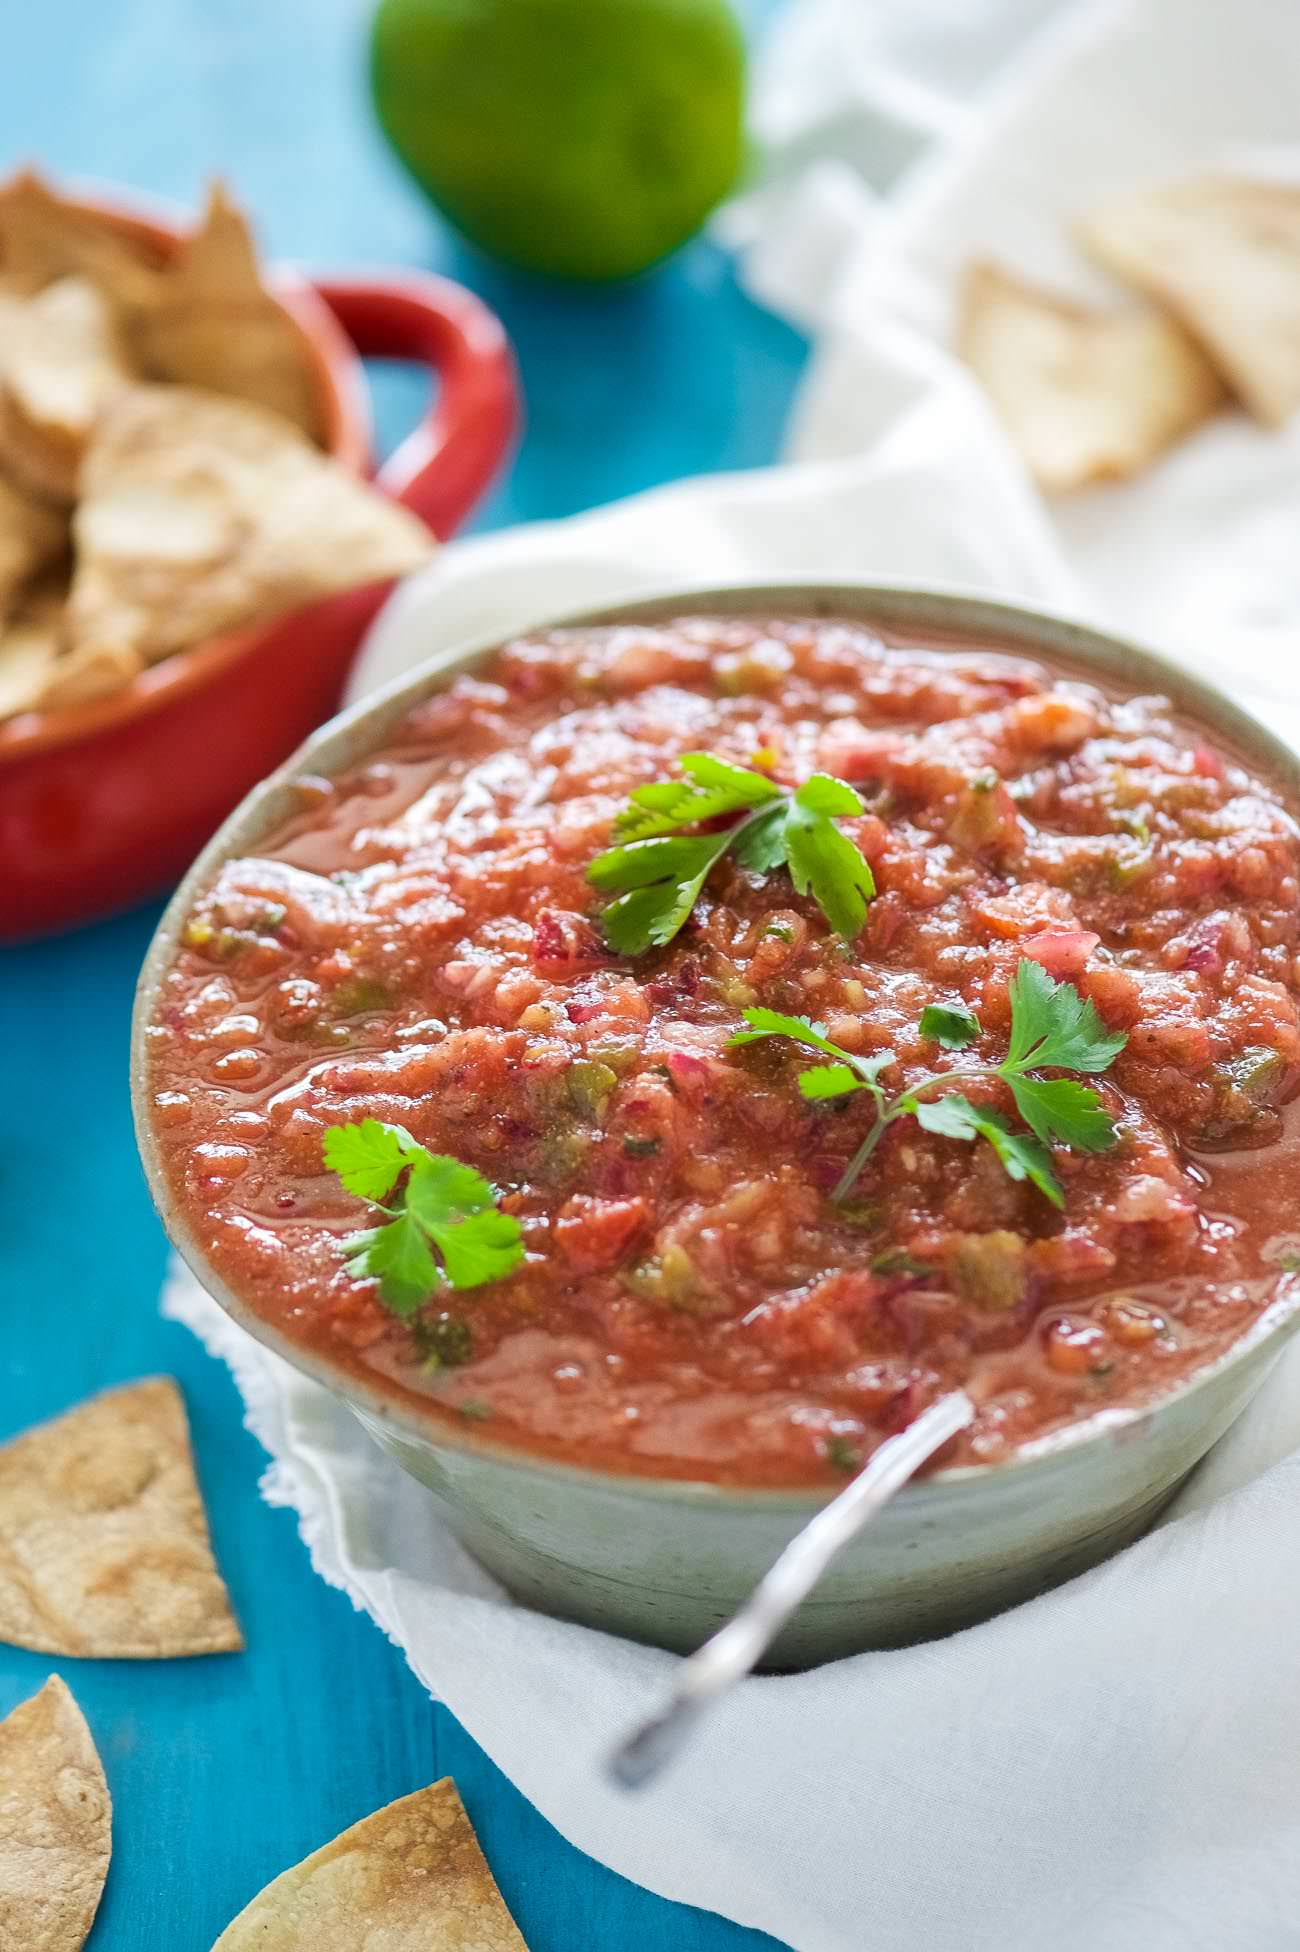 This Restaurant Style Salsa Recipe is a simple and delicious salsa that is made in the blender so it comes together quickly for your next Taco Tuesday! 